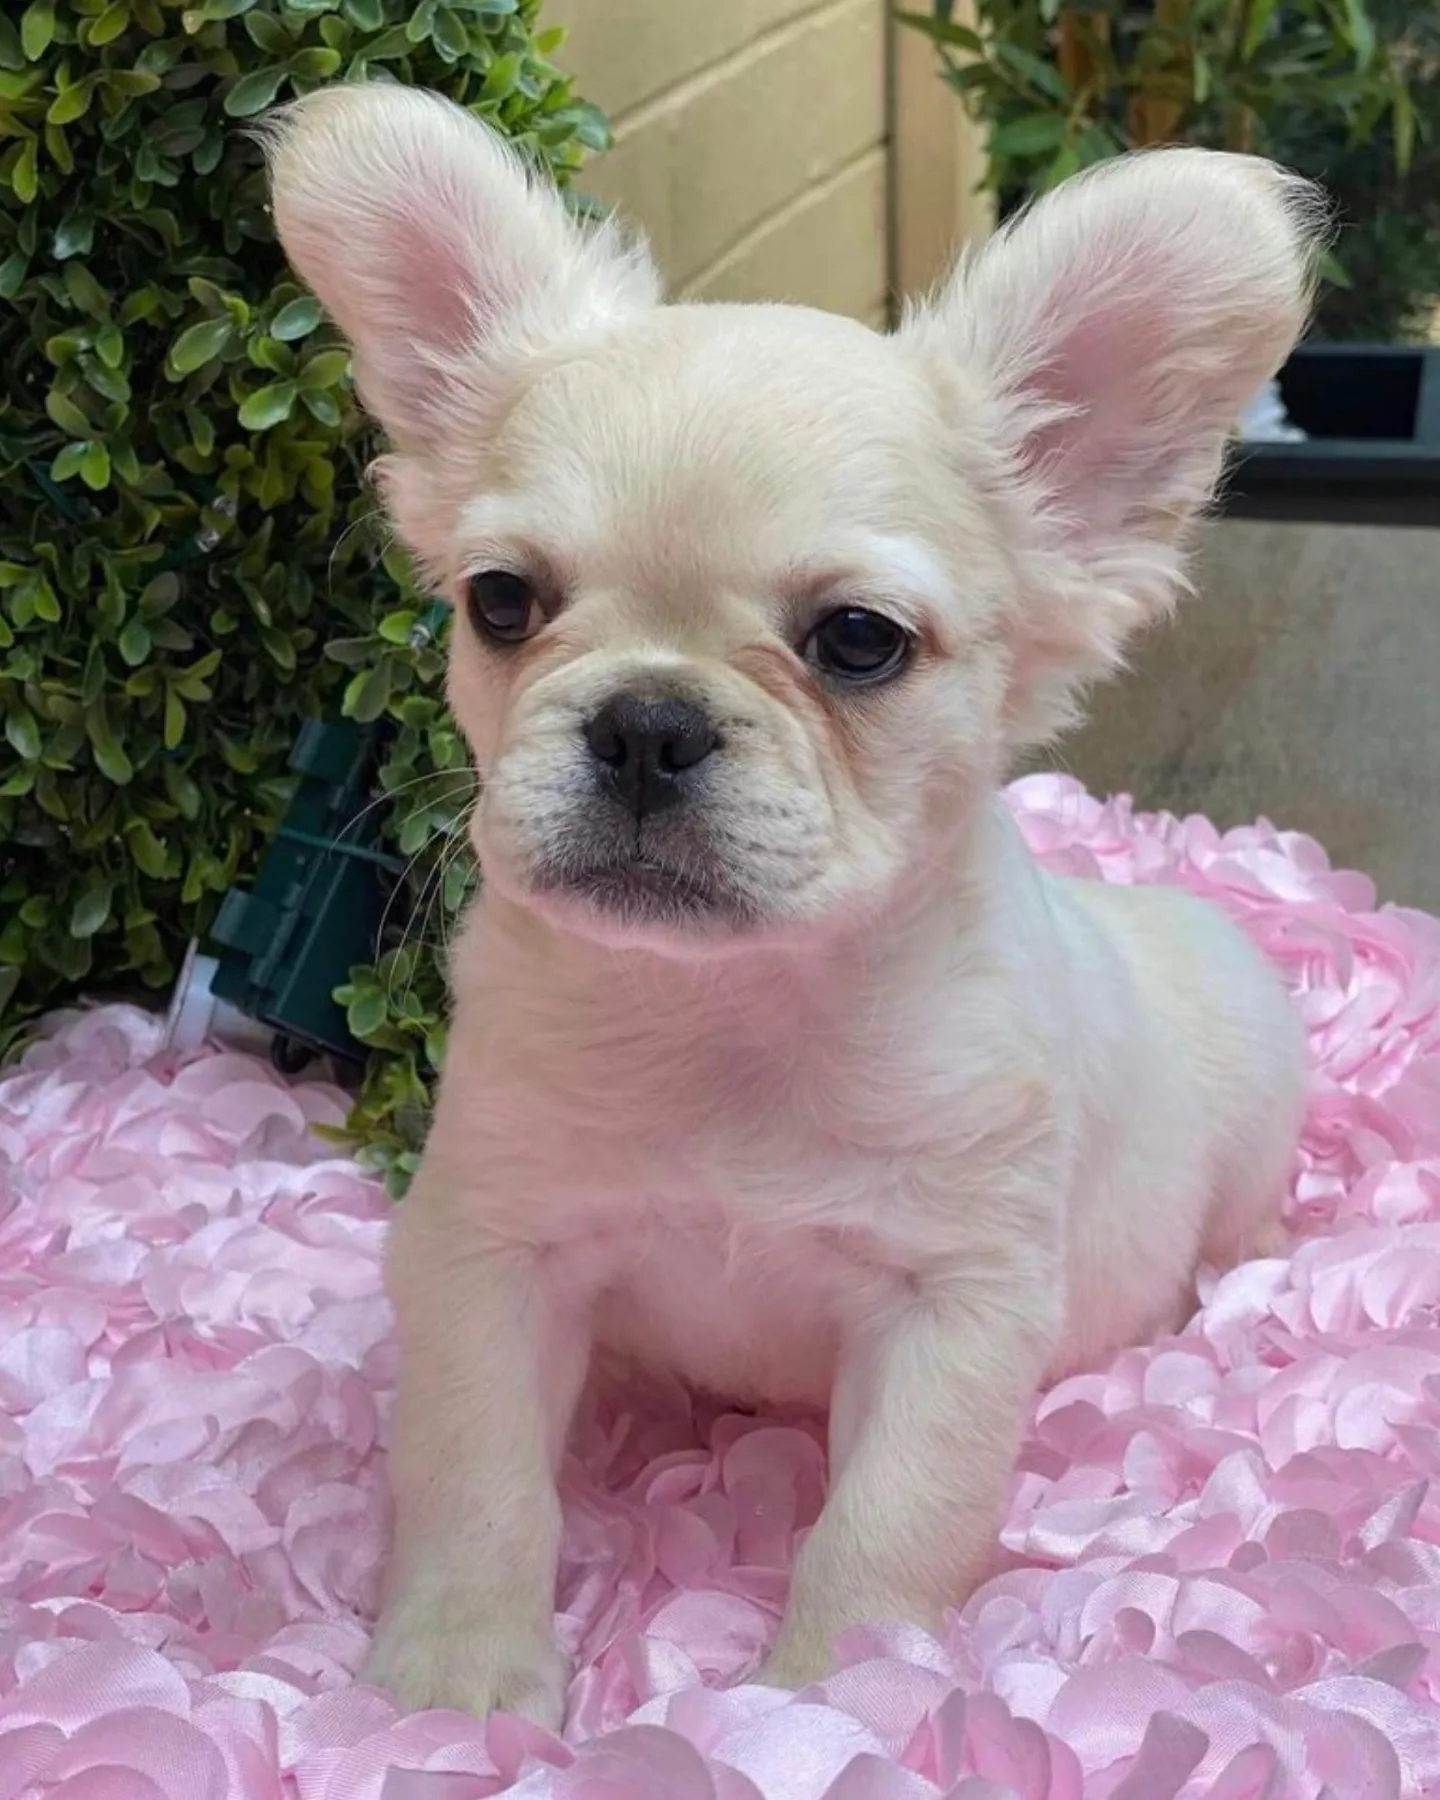 The fluffy french bulldog price is so high because of how rare these dogs are